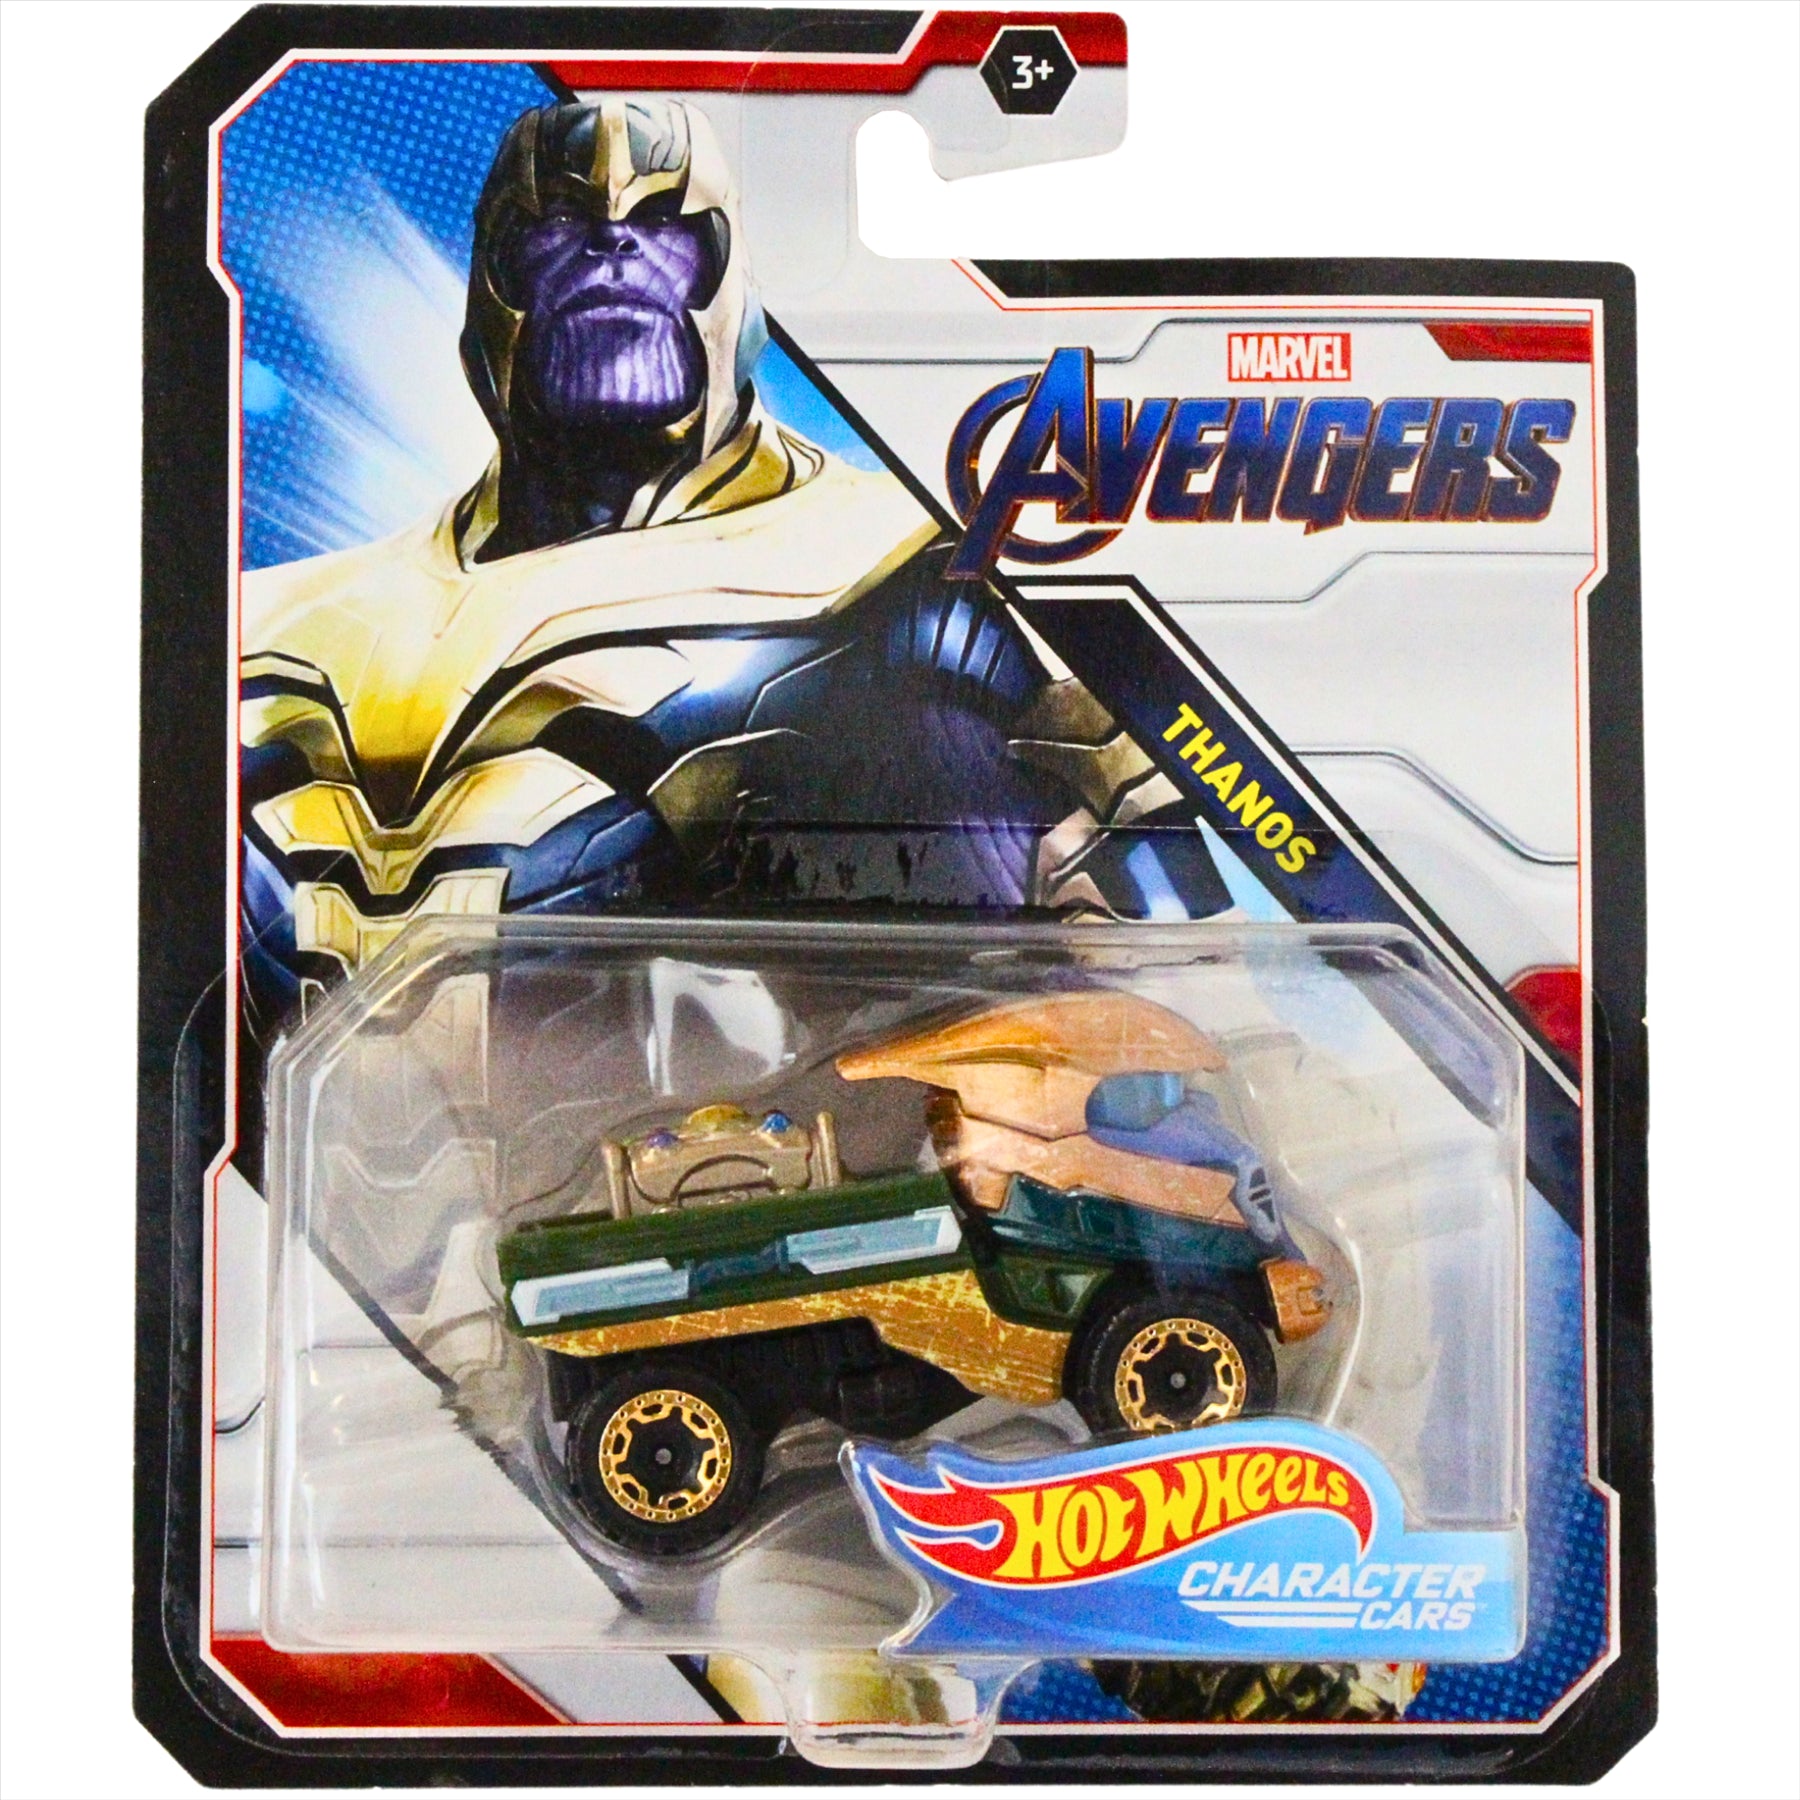 Hot wheels Character Cars Thanos Truck 1:64 Scale Diecast - Toptoys2u